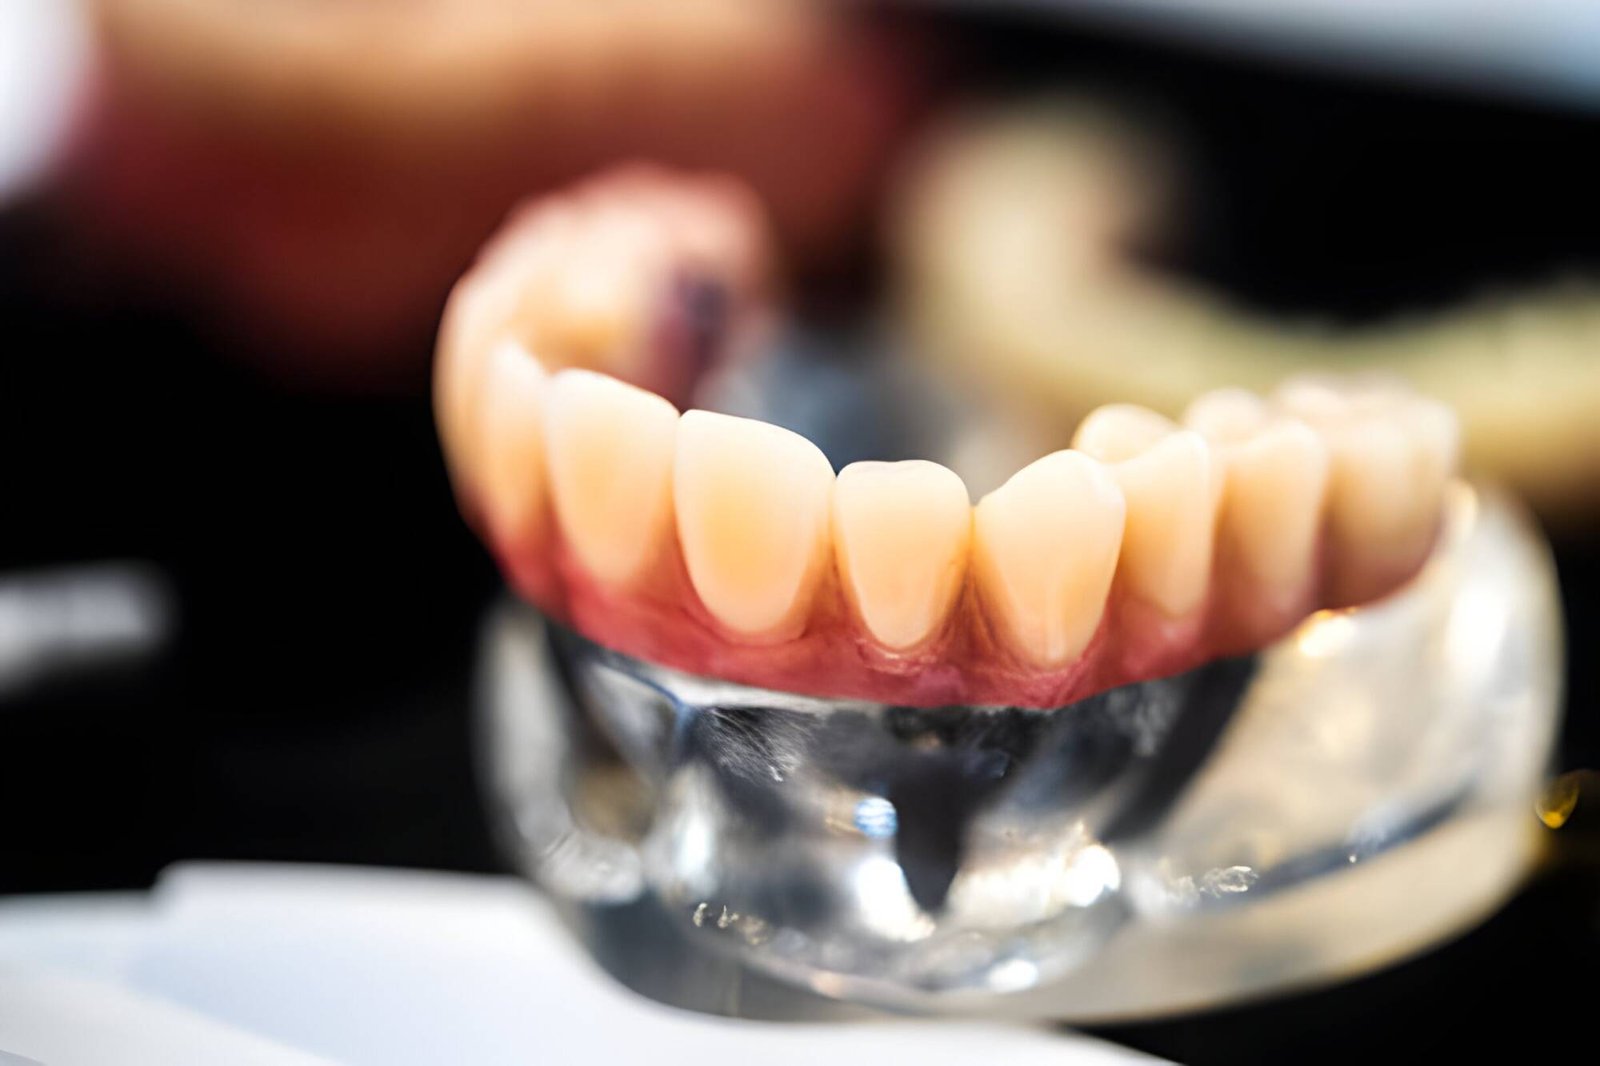 Can You Lose Your Gums Around Dental Implants?